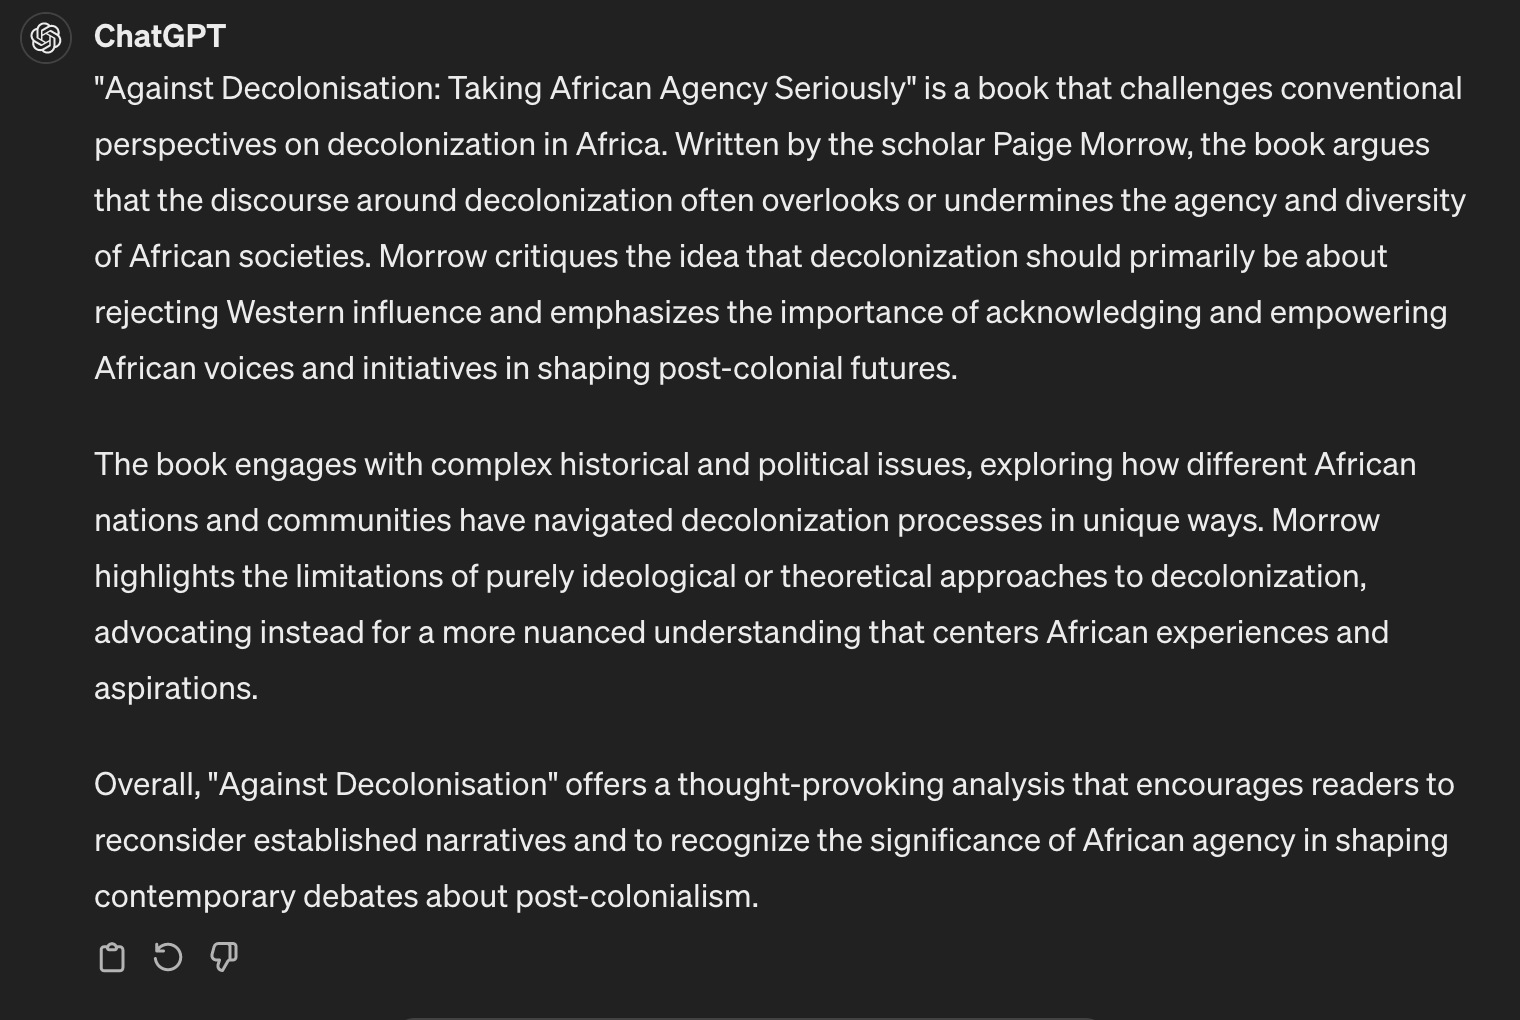 Graphic that reads - "Against Decolonisation: Taking African Agency Seriously" is a book that challenges conventional perspectives on decolonization in Africa. Written by the scholar Paige Morrow, the book argues that the discourse around decolonization often overlooks or undermines the agency and diversity of African societies. Morrow critiques the idea that decolonization should primarily be about rejecting Western influence and emphasizes the importance of acknowledging and empowering African voices and initiatives in shaping post-colonial futures.

The book engages with complex historical and political issues, exploring how different African nations and communities have navigated decolonization processes in unique ways. Morrow highlights the limitations of purely ideological or theoretical approaches to decolonization, advocating instead for a more nuanced understanding that centers African experiences and aspirations.

Overall, "Against Decolonisation" offers a thought-provoking analysis that encourages readers to reconsider established narratives and to recognize the significance of African agency in shaping contemporary debates about post-colonialism.